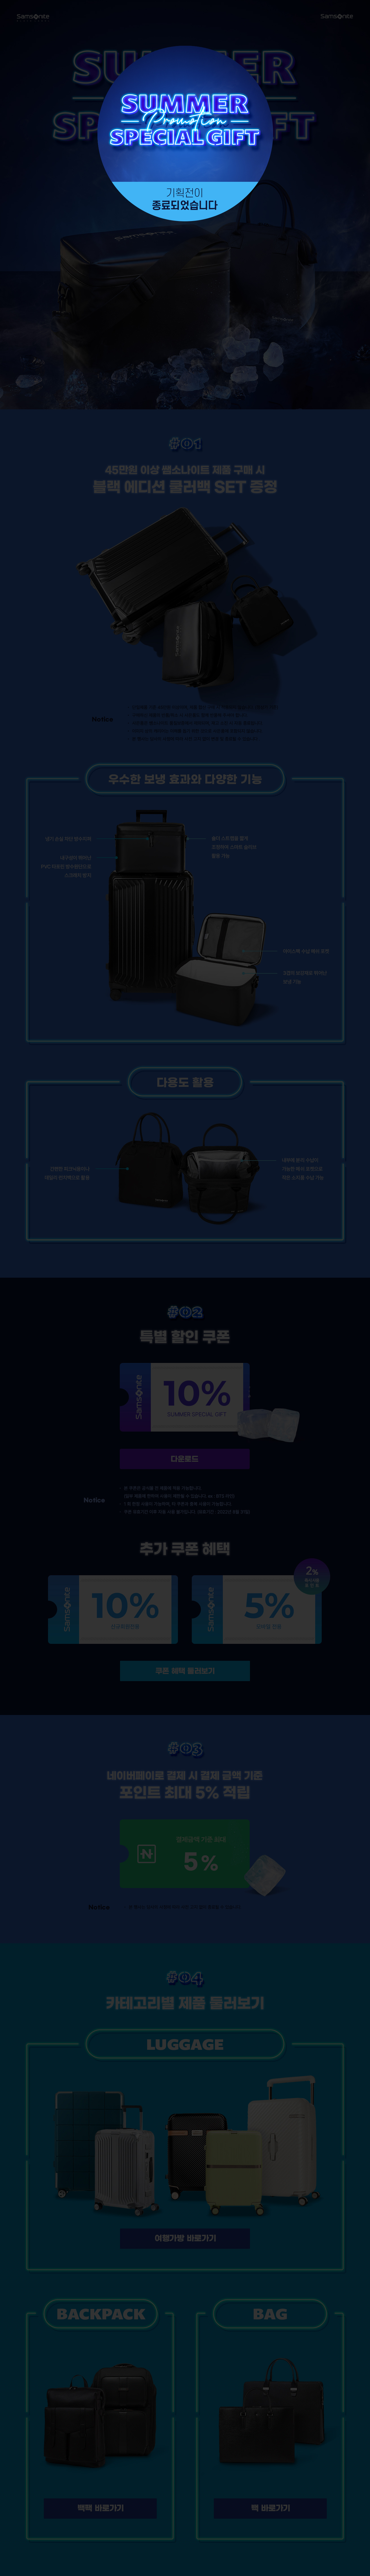 SUMMER SPECIAL GIFT PROMOTION 기획전이 종료되었습니다.